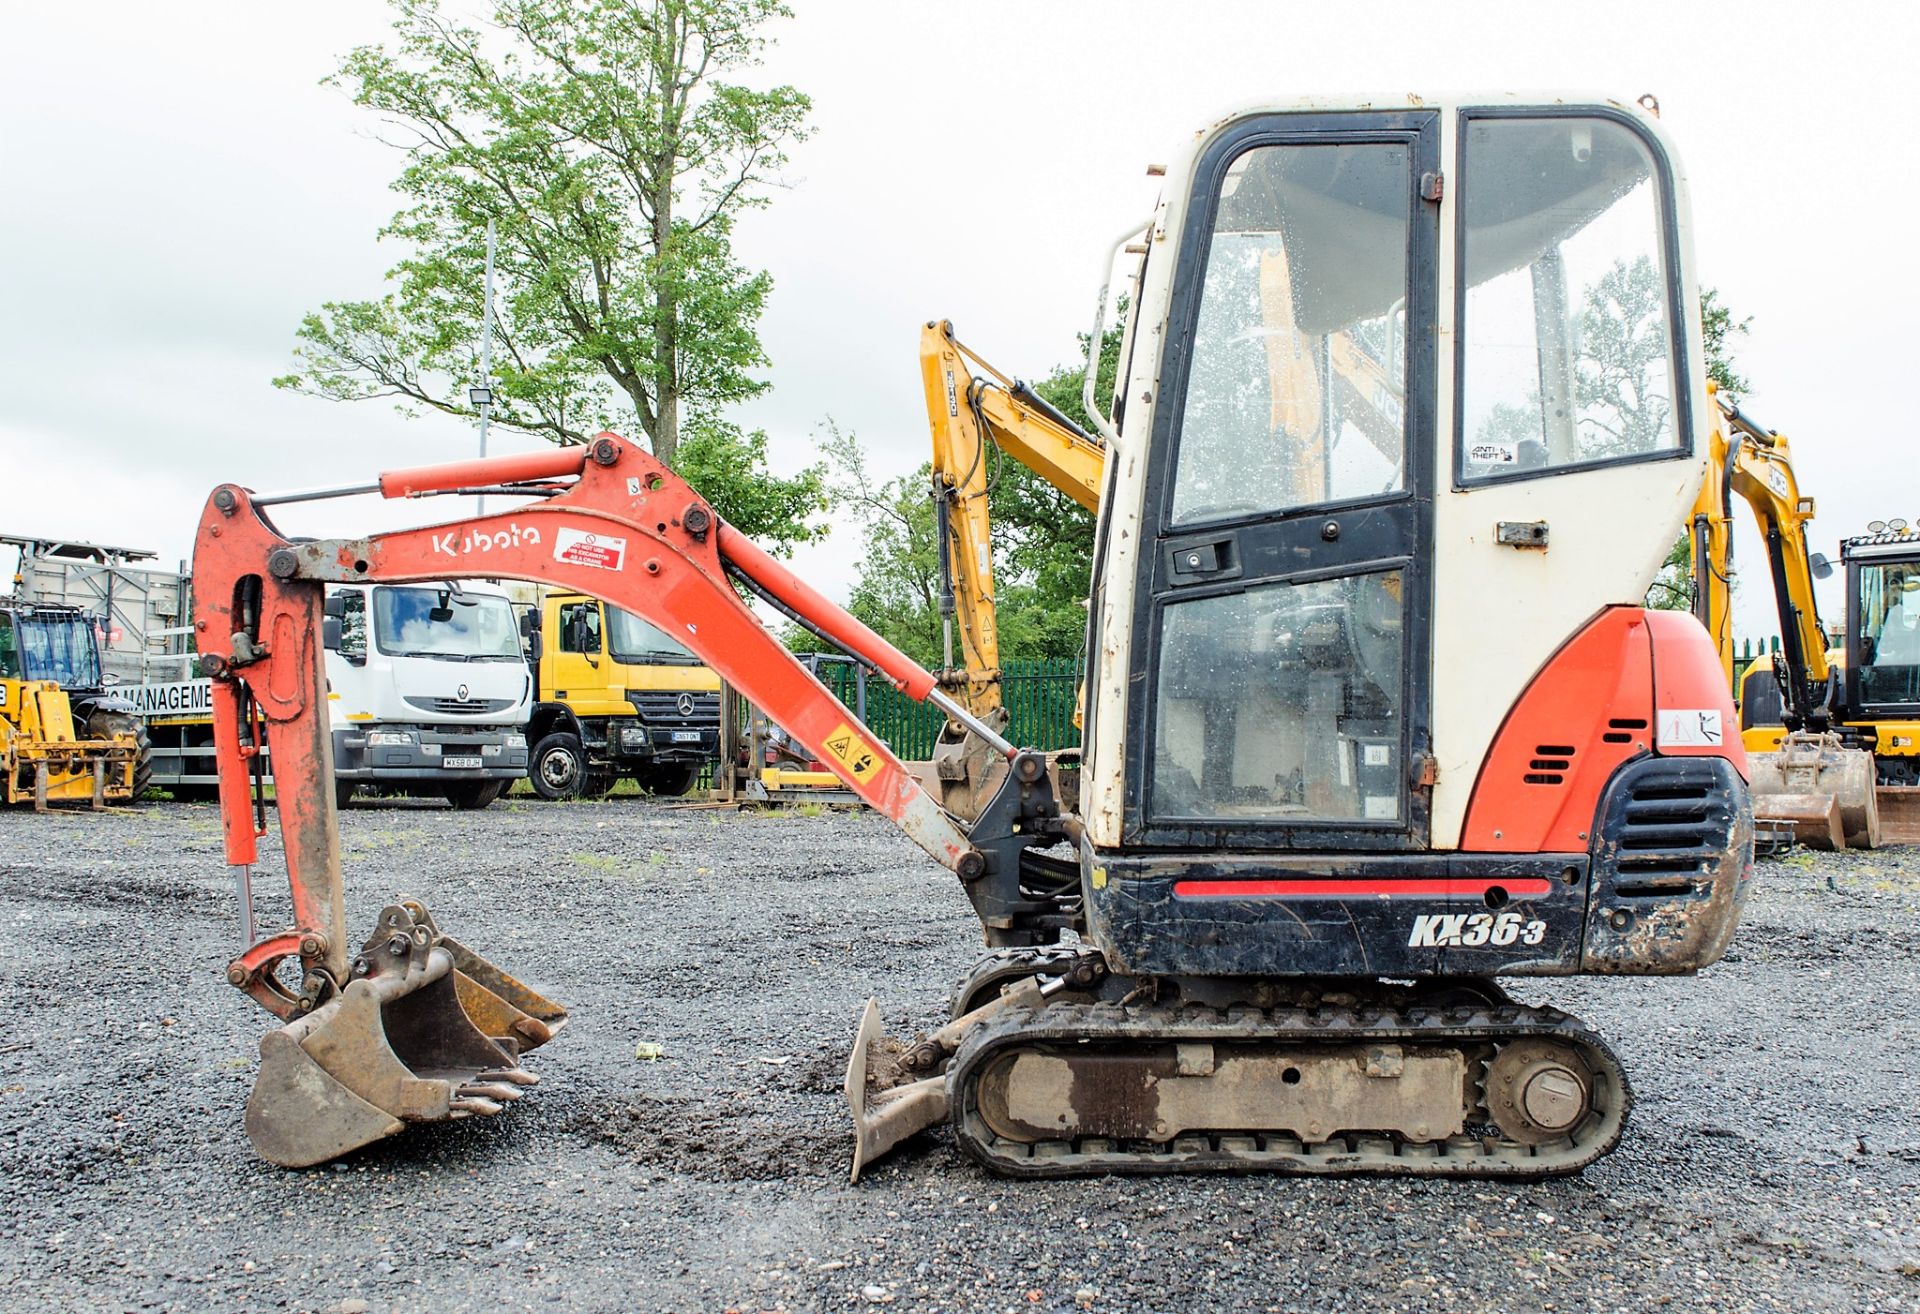 Kubota KX36-3 1.5 tonne rubber tracked mini excavator Year: S/N: 5528 blade, piped & 3 buckets - Image 8 of 18